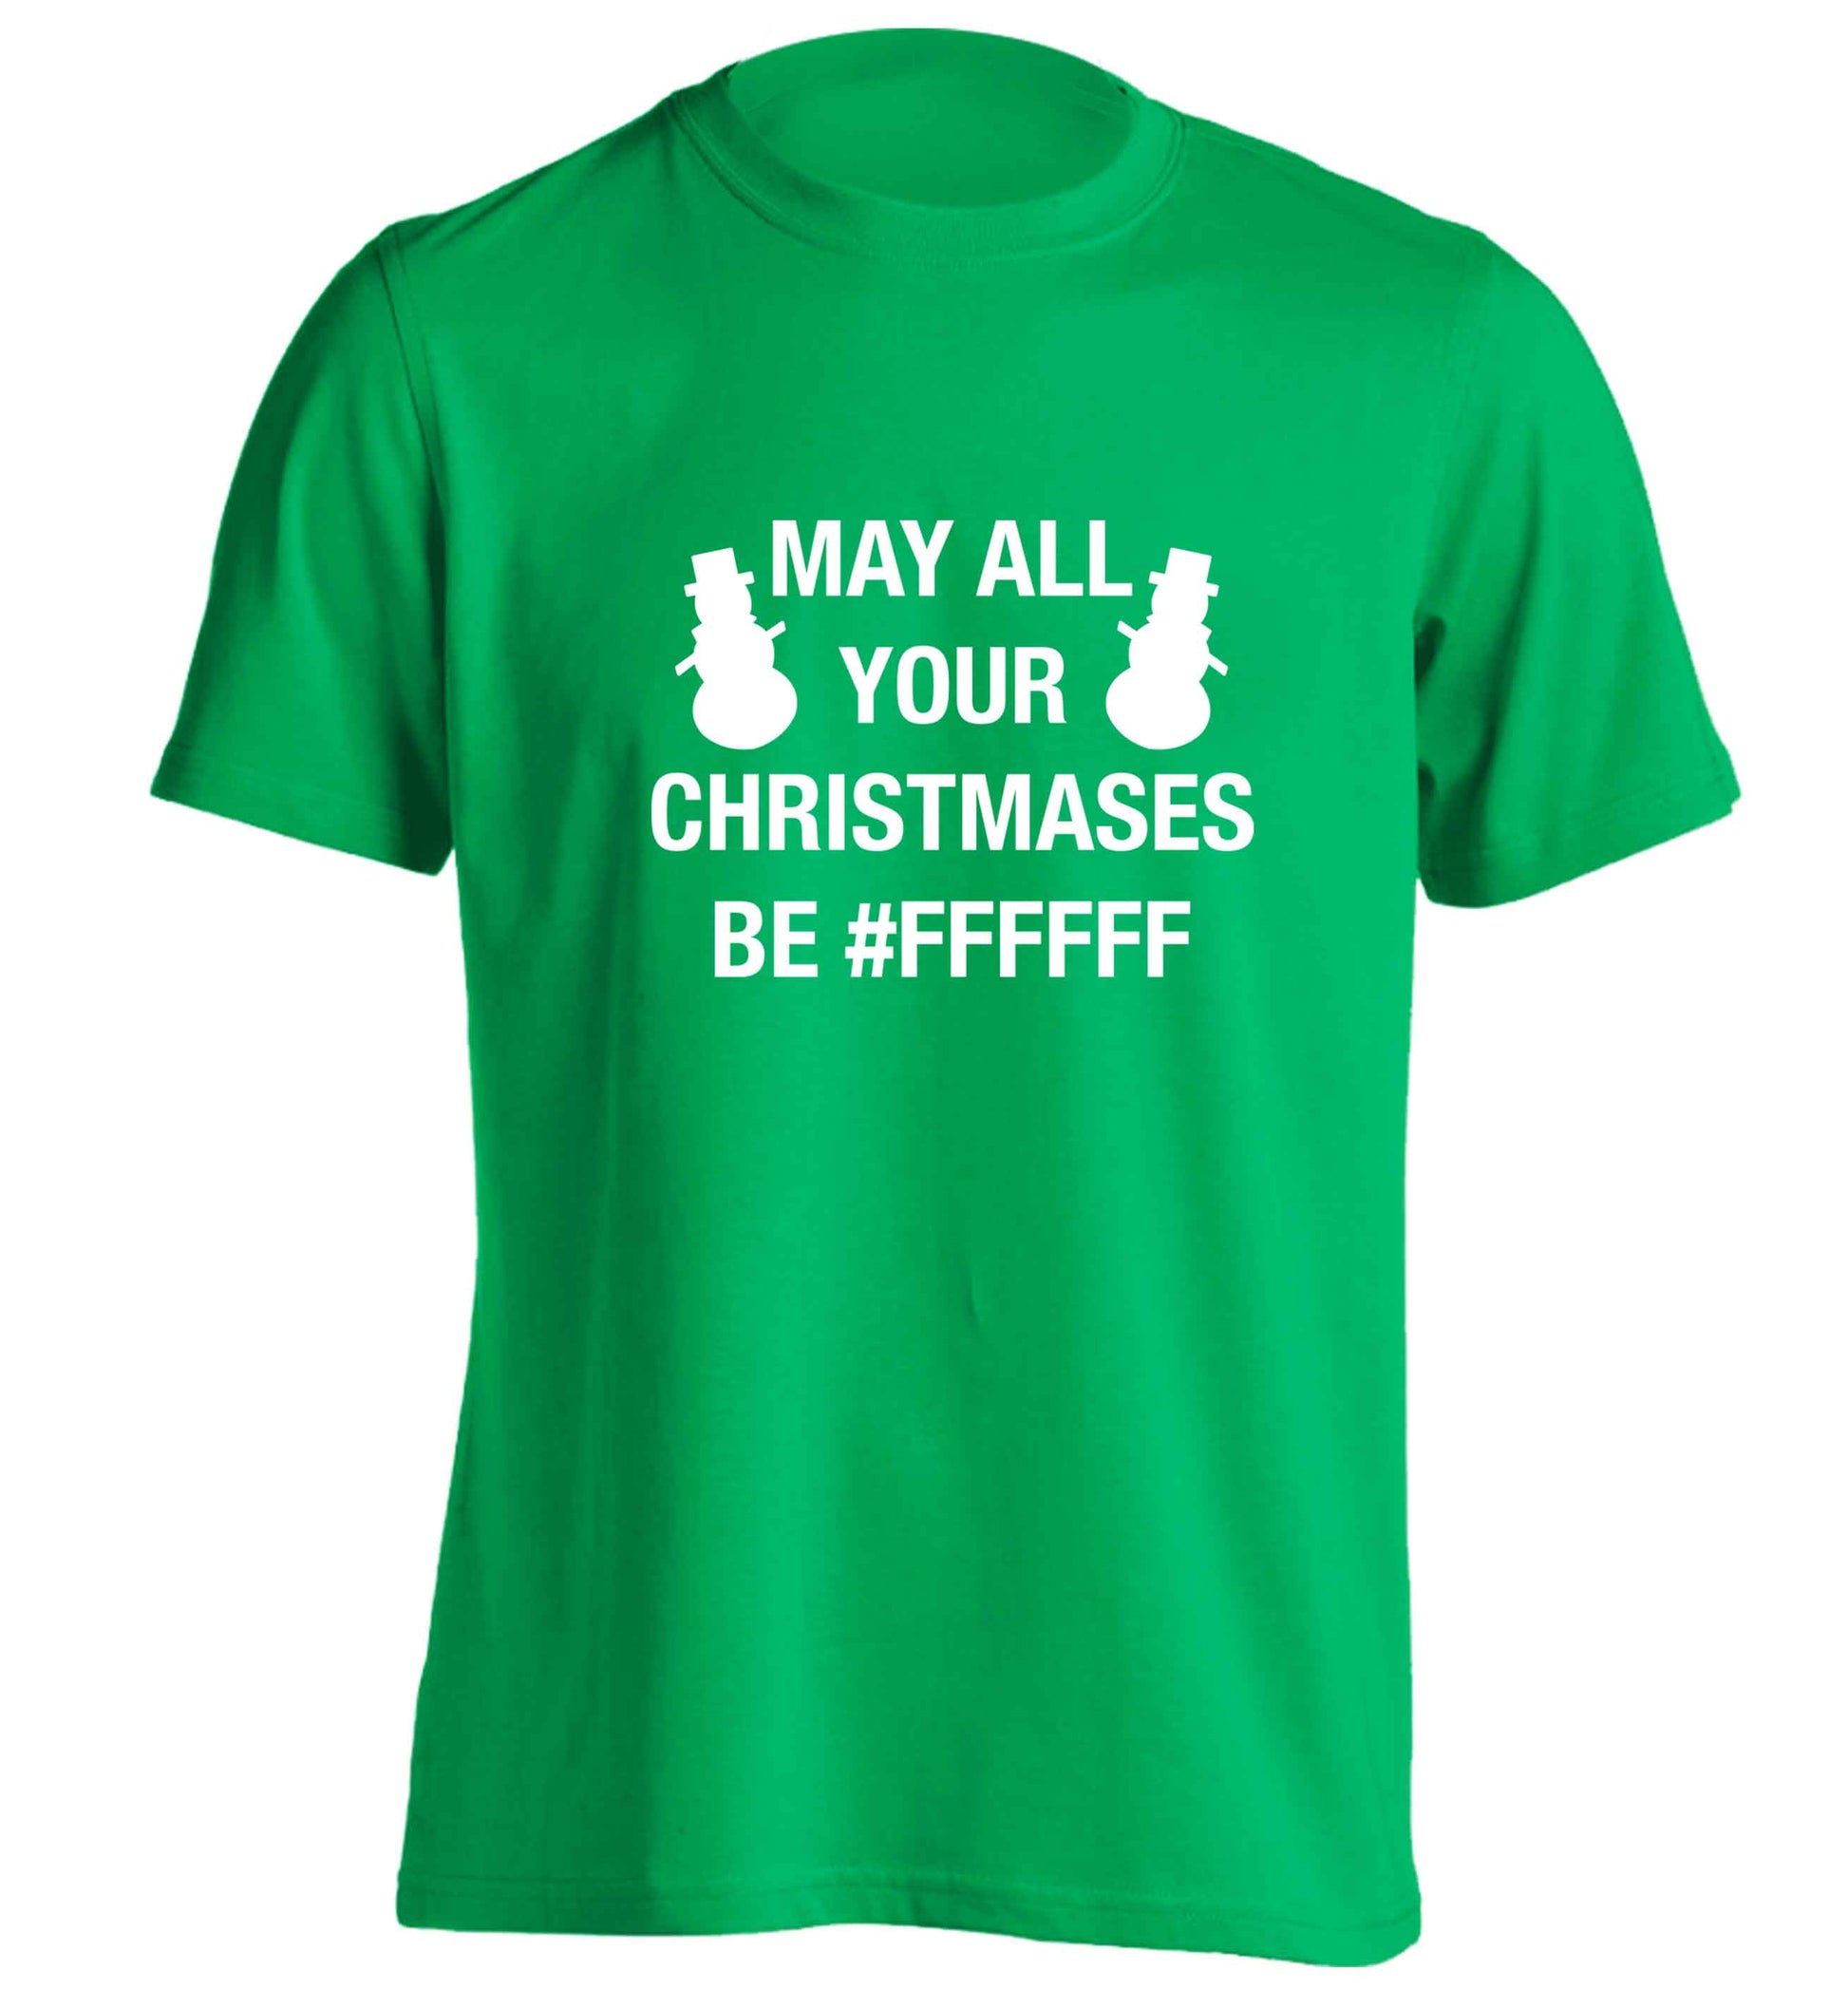 May all your Christmases be #FFFFFF adults unisex green Tshirt 2XL